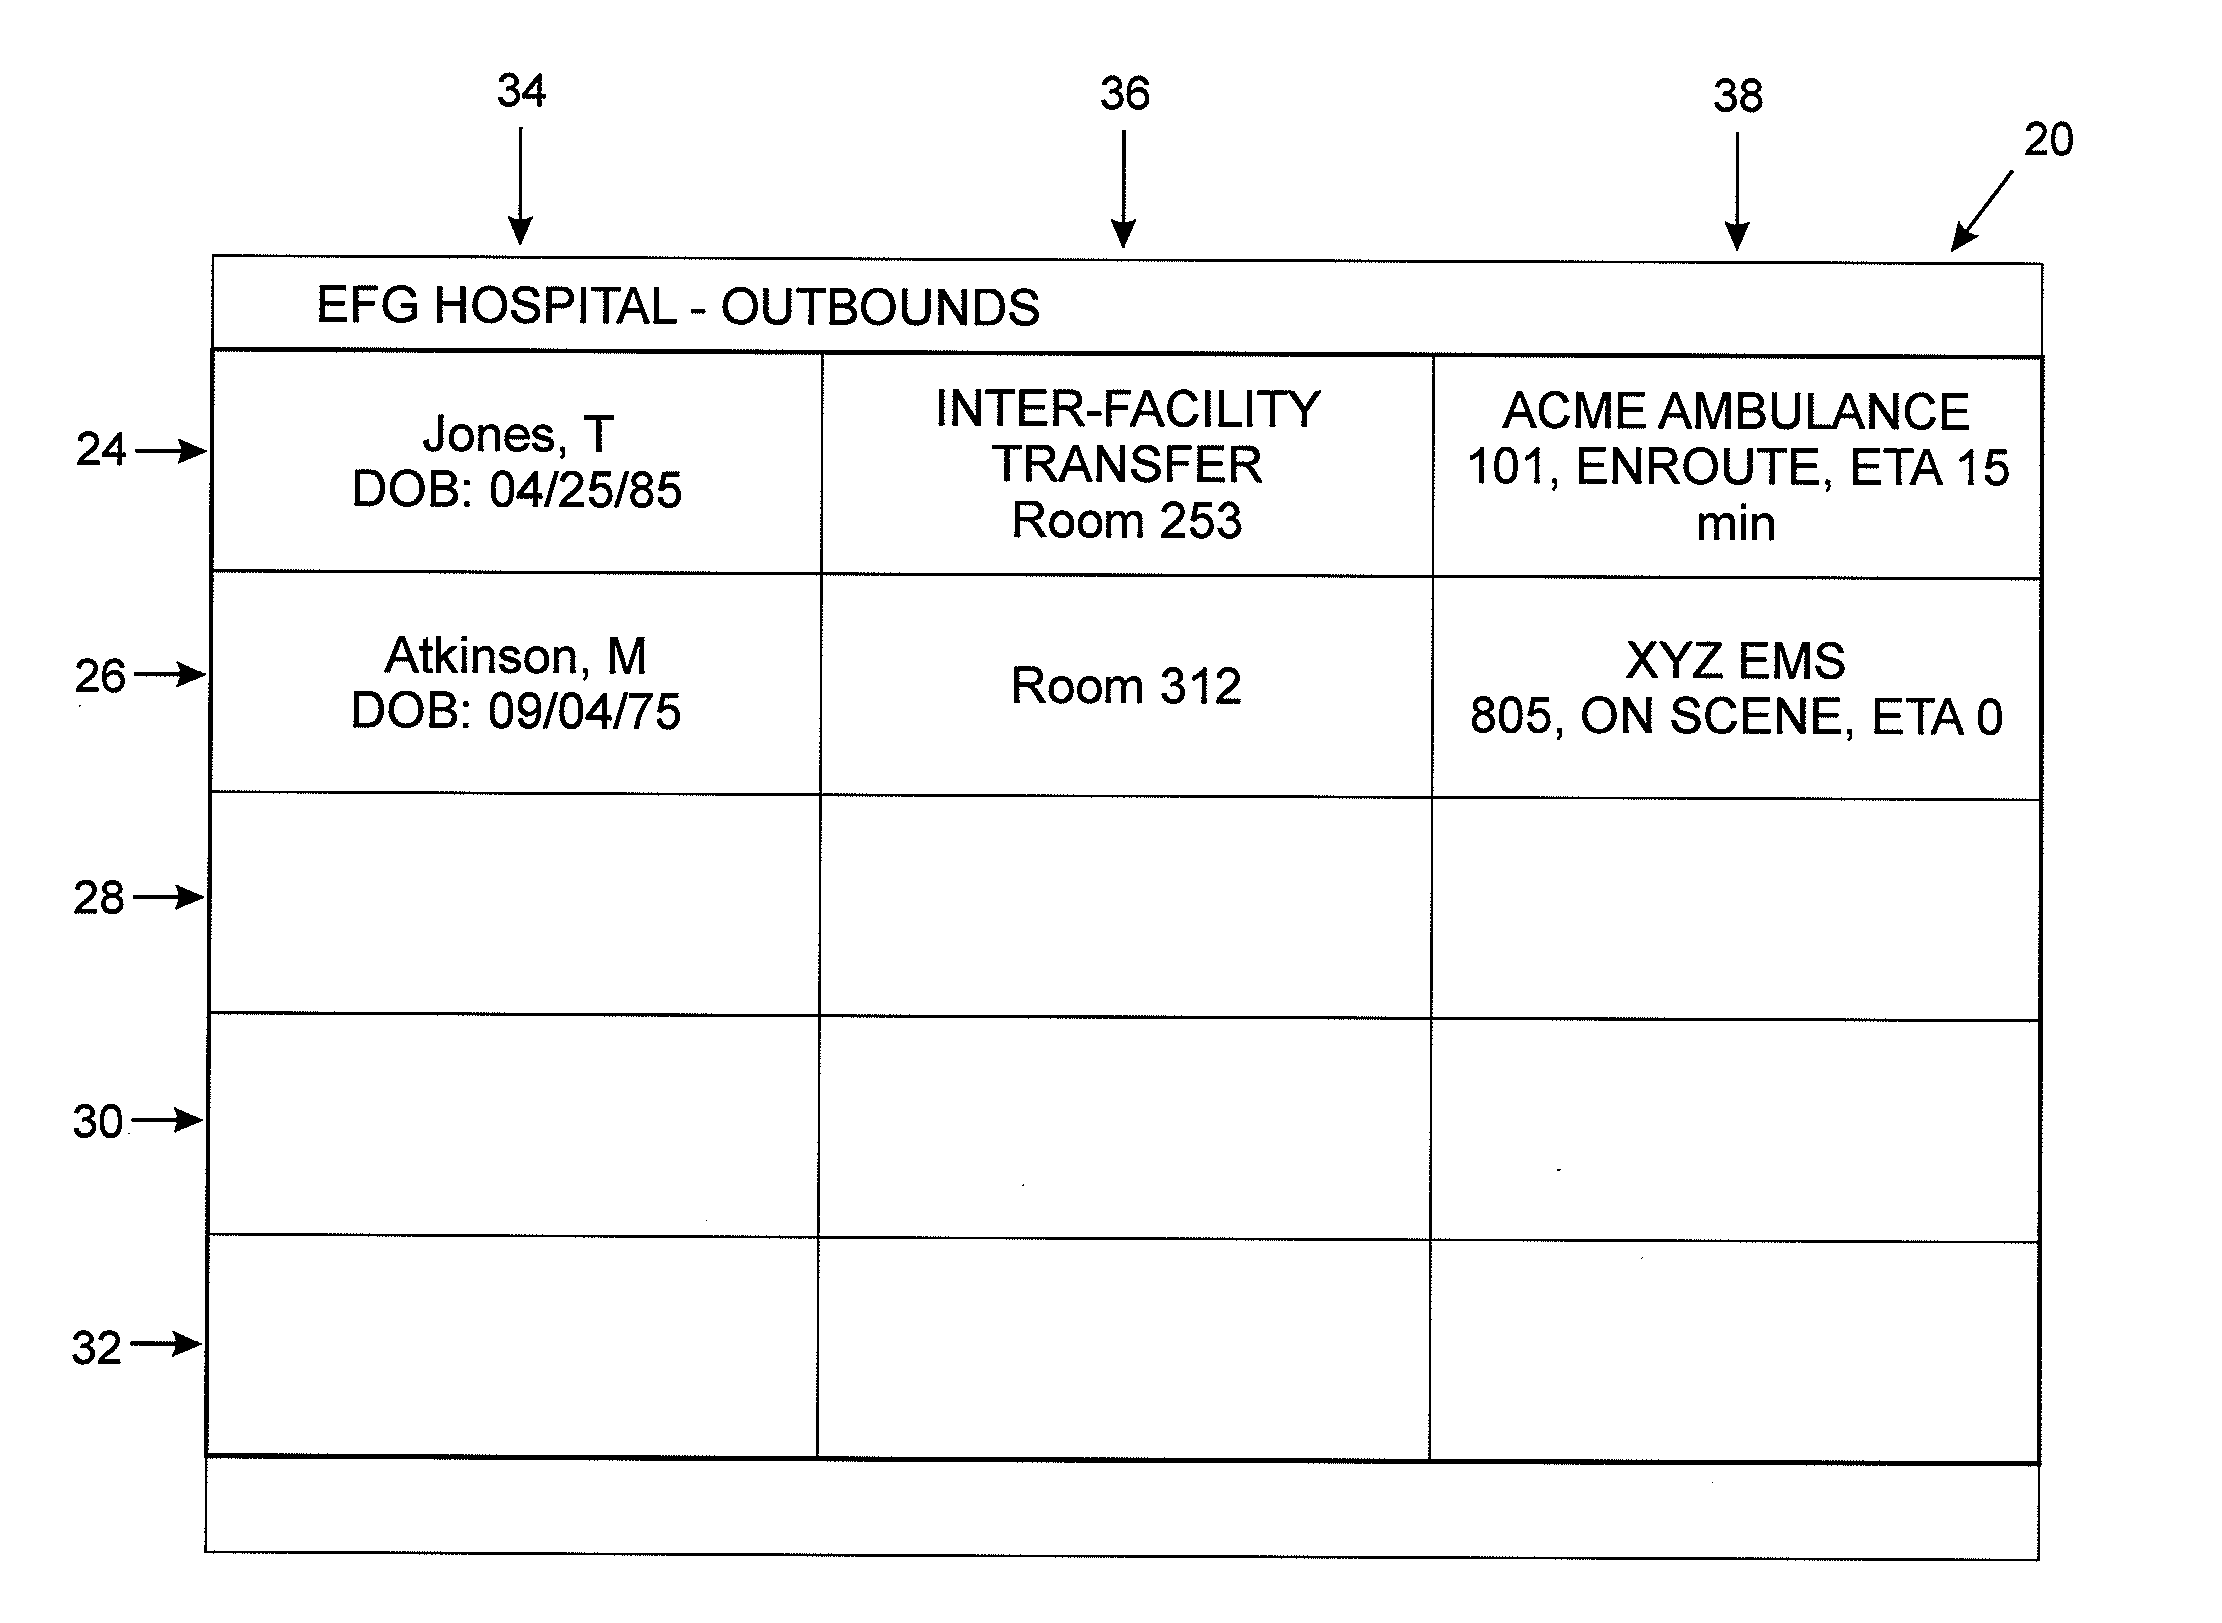 System and method for visual display of bed status by integration of location information from ambulance transports